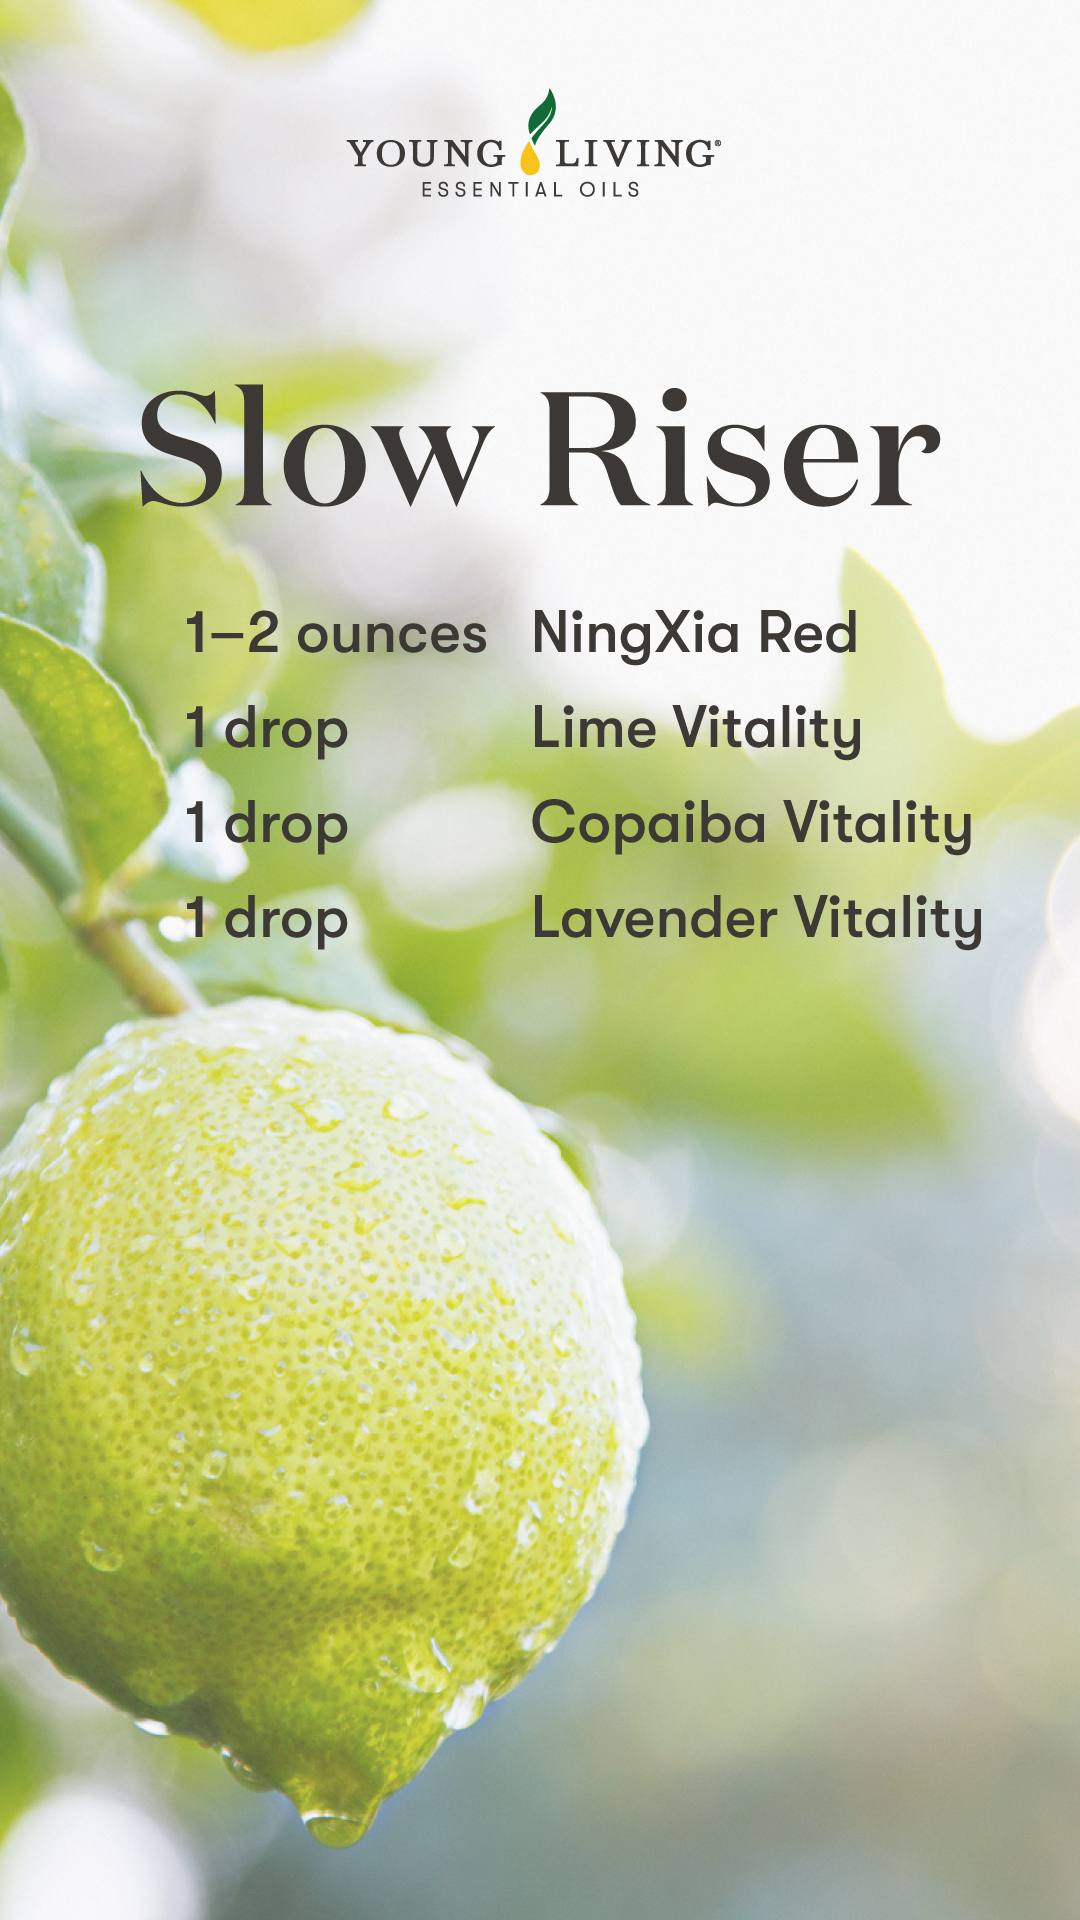 Slow Riser NingXia Red shot blend - • 1–2 ounces NingXia Red • 1 drop Lime Vitality essential oil • 1 drop Copaiba Vitality essential oil • 1 drop Lavender Vitality essential oil - Young Living Lavender Life Blog